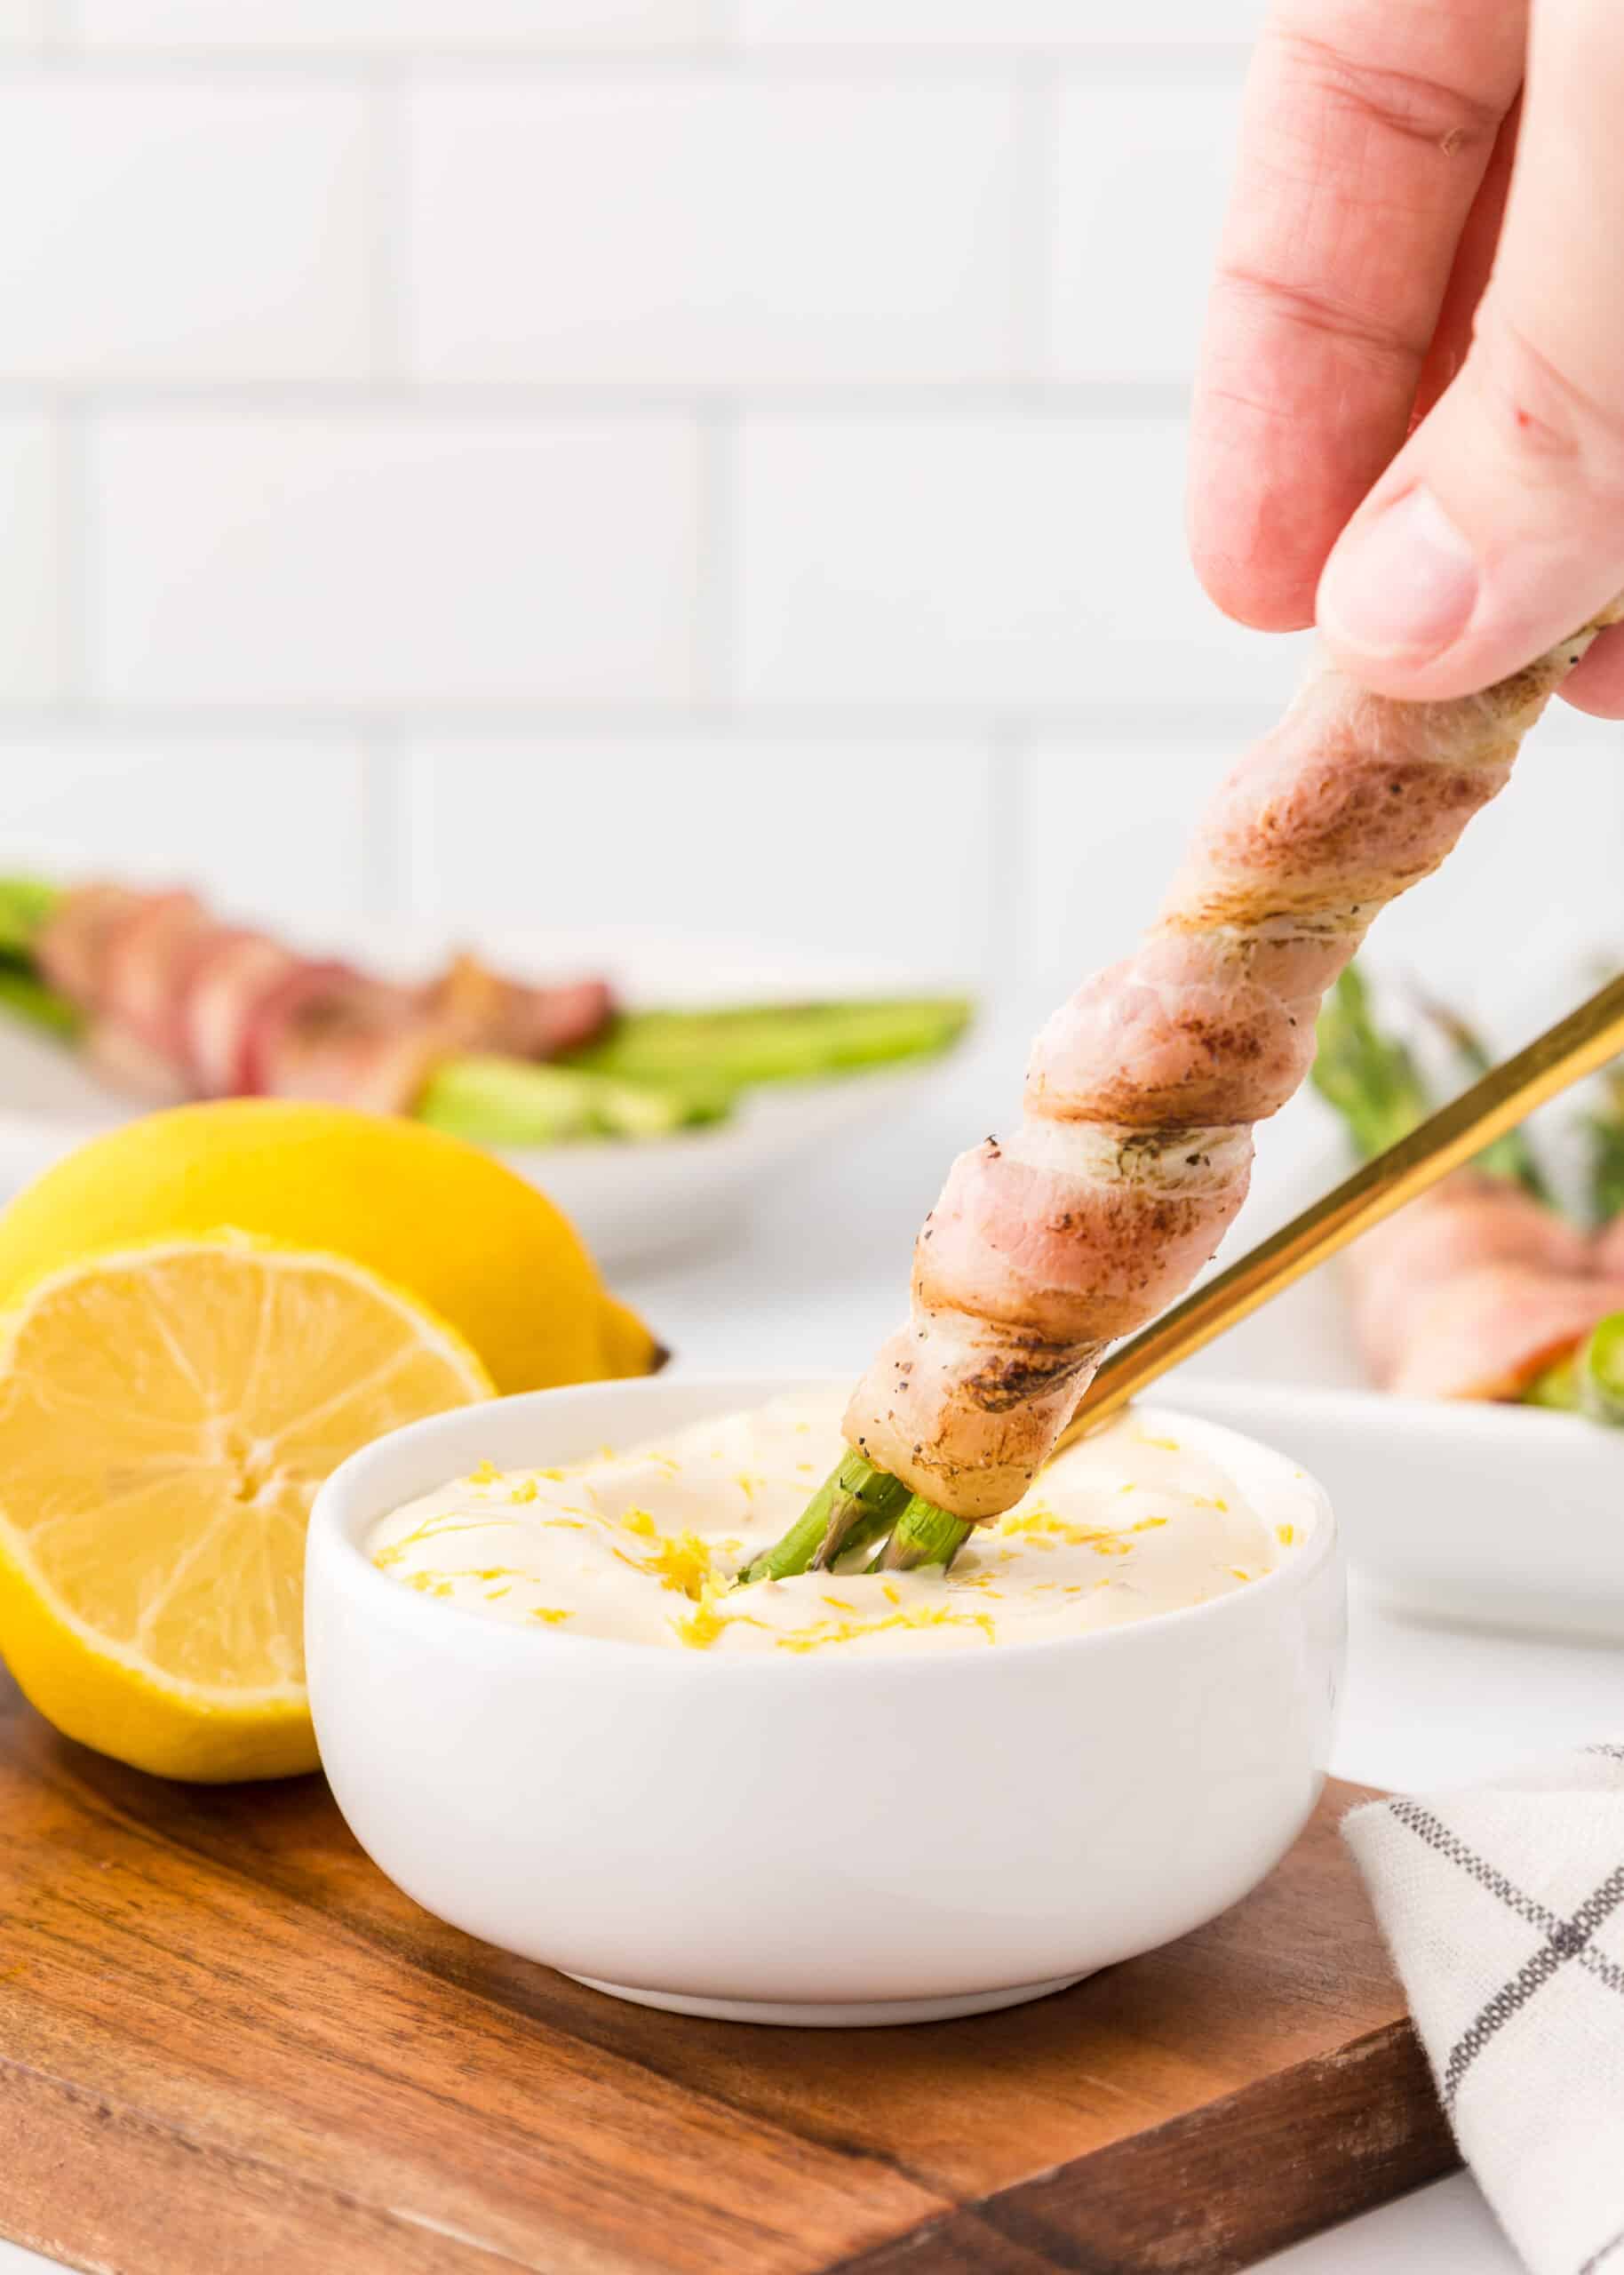 Keto Grilled Bacon-Wrapped Asparagus with Lemon Aioli